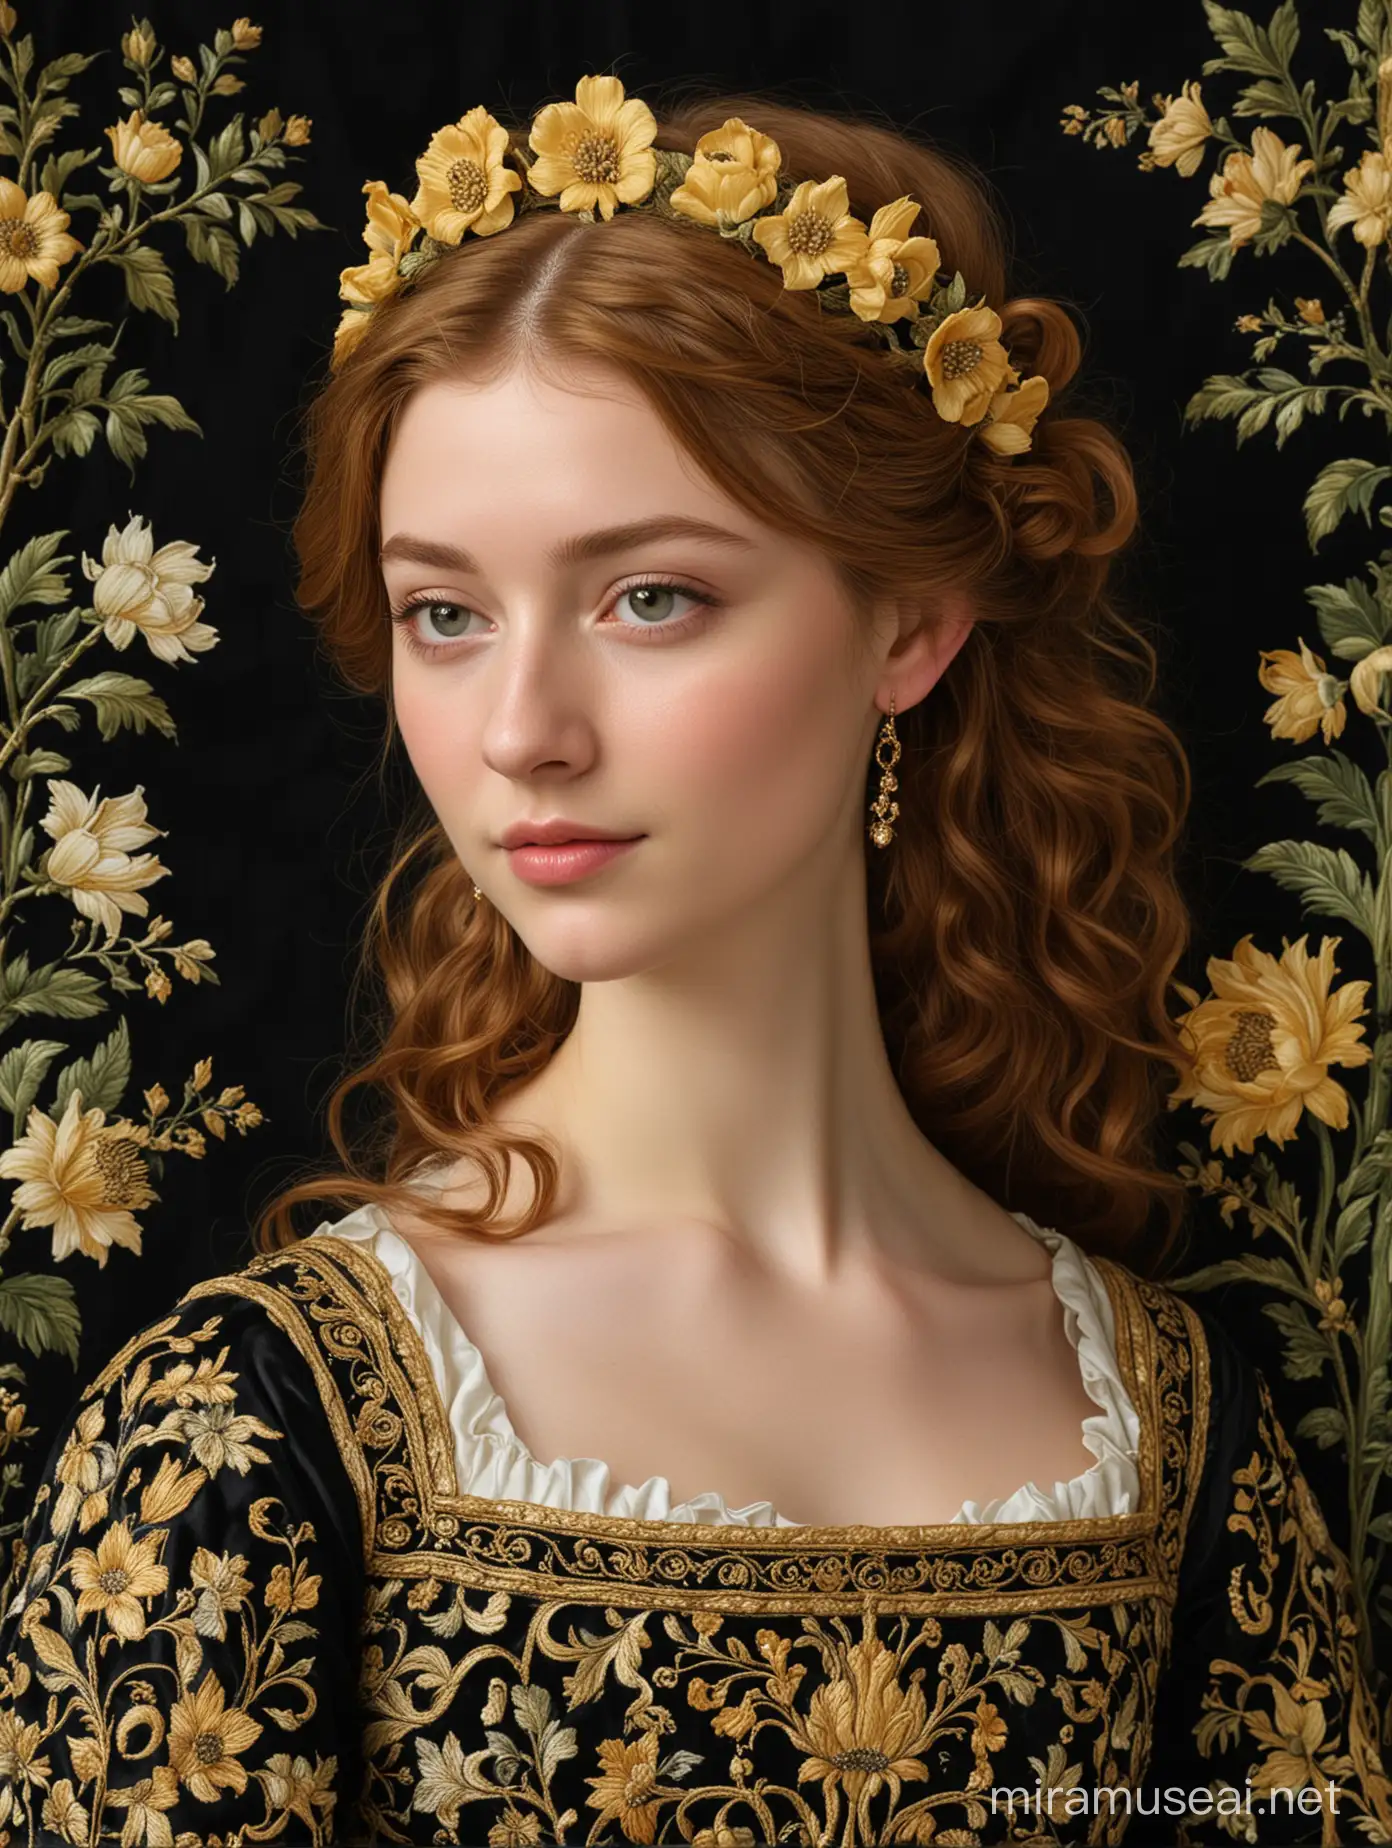 n the style of Botticelli Primavera, a beautiful young woman wearing a 16th century black and gold gown with ornamental embroidery